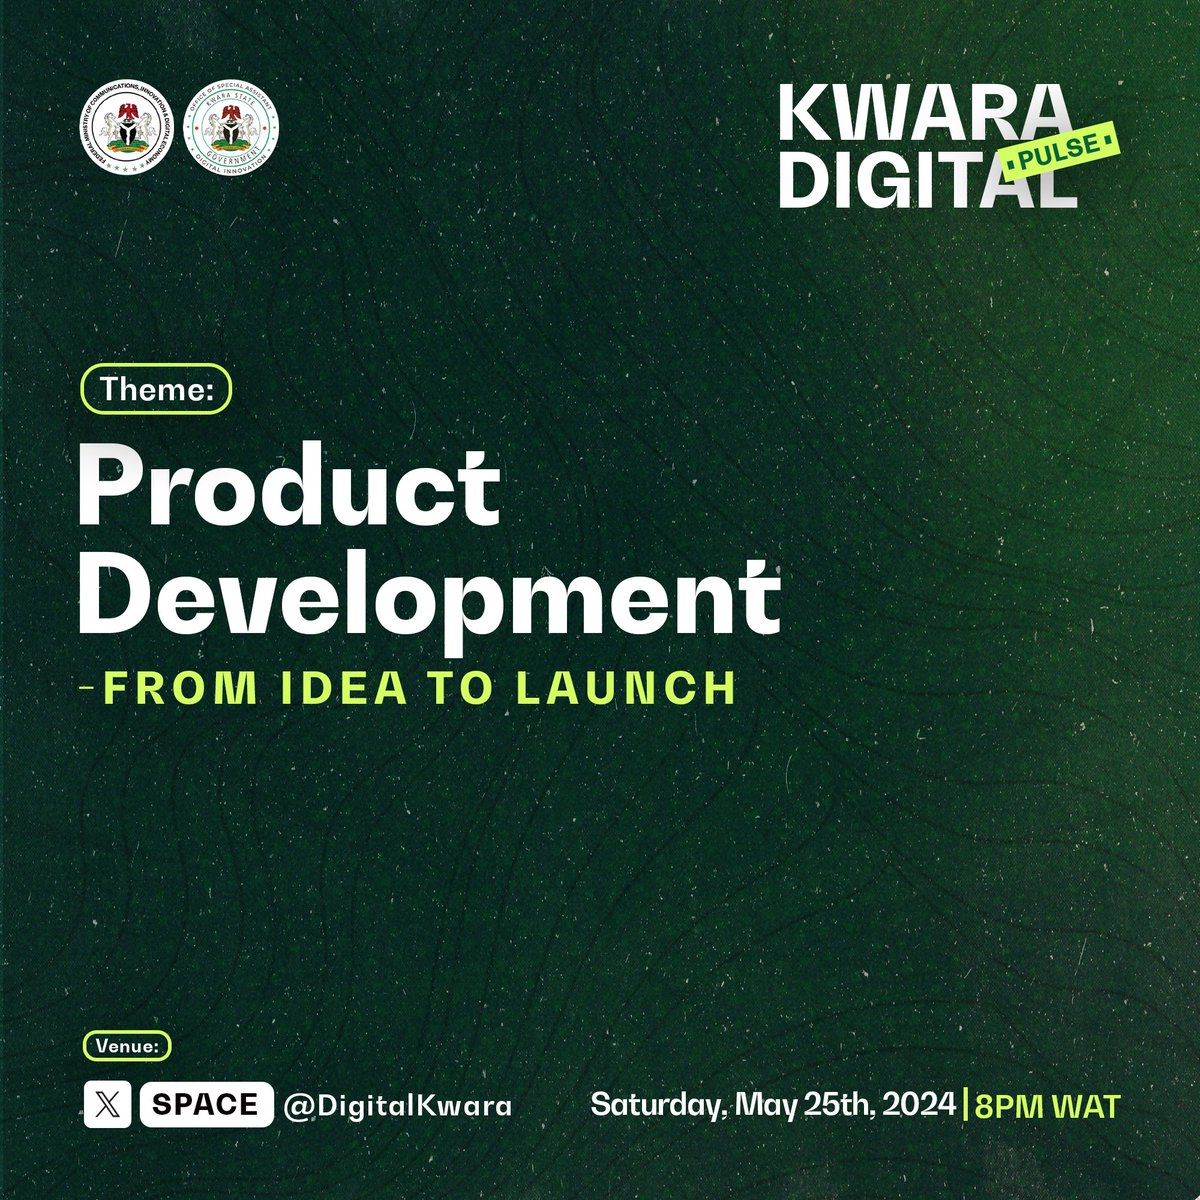 Calling all innovators and entrepreneurs! The May edition of #KDP is here with the theme 'Product Development: From Idea to Launch.' Gain valuable insights from our speakers on transforming your concepts into market-ready products. Follow @DigitalKwara for more insights.